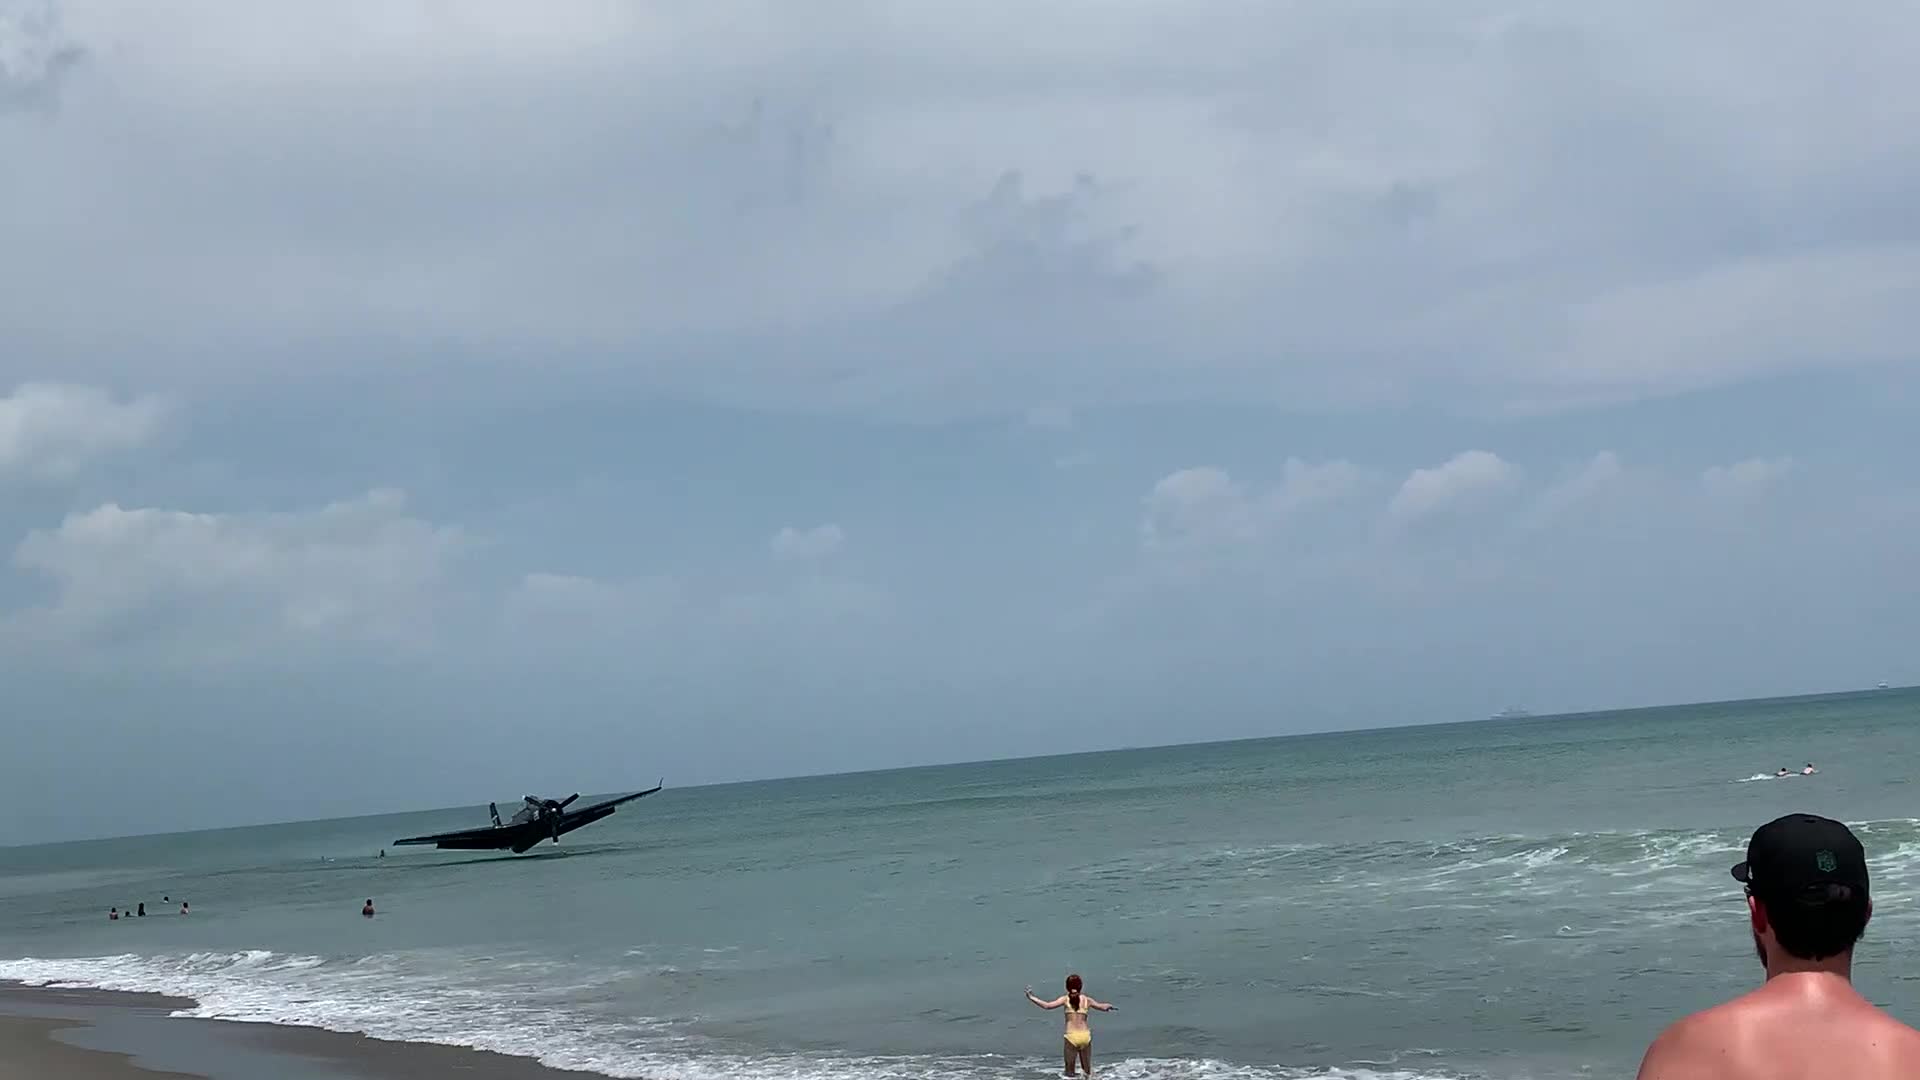 Pilot Forced to Land on Crowded Beach